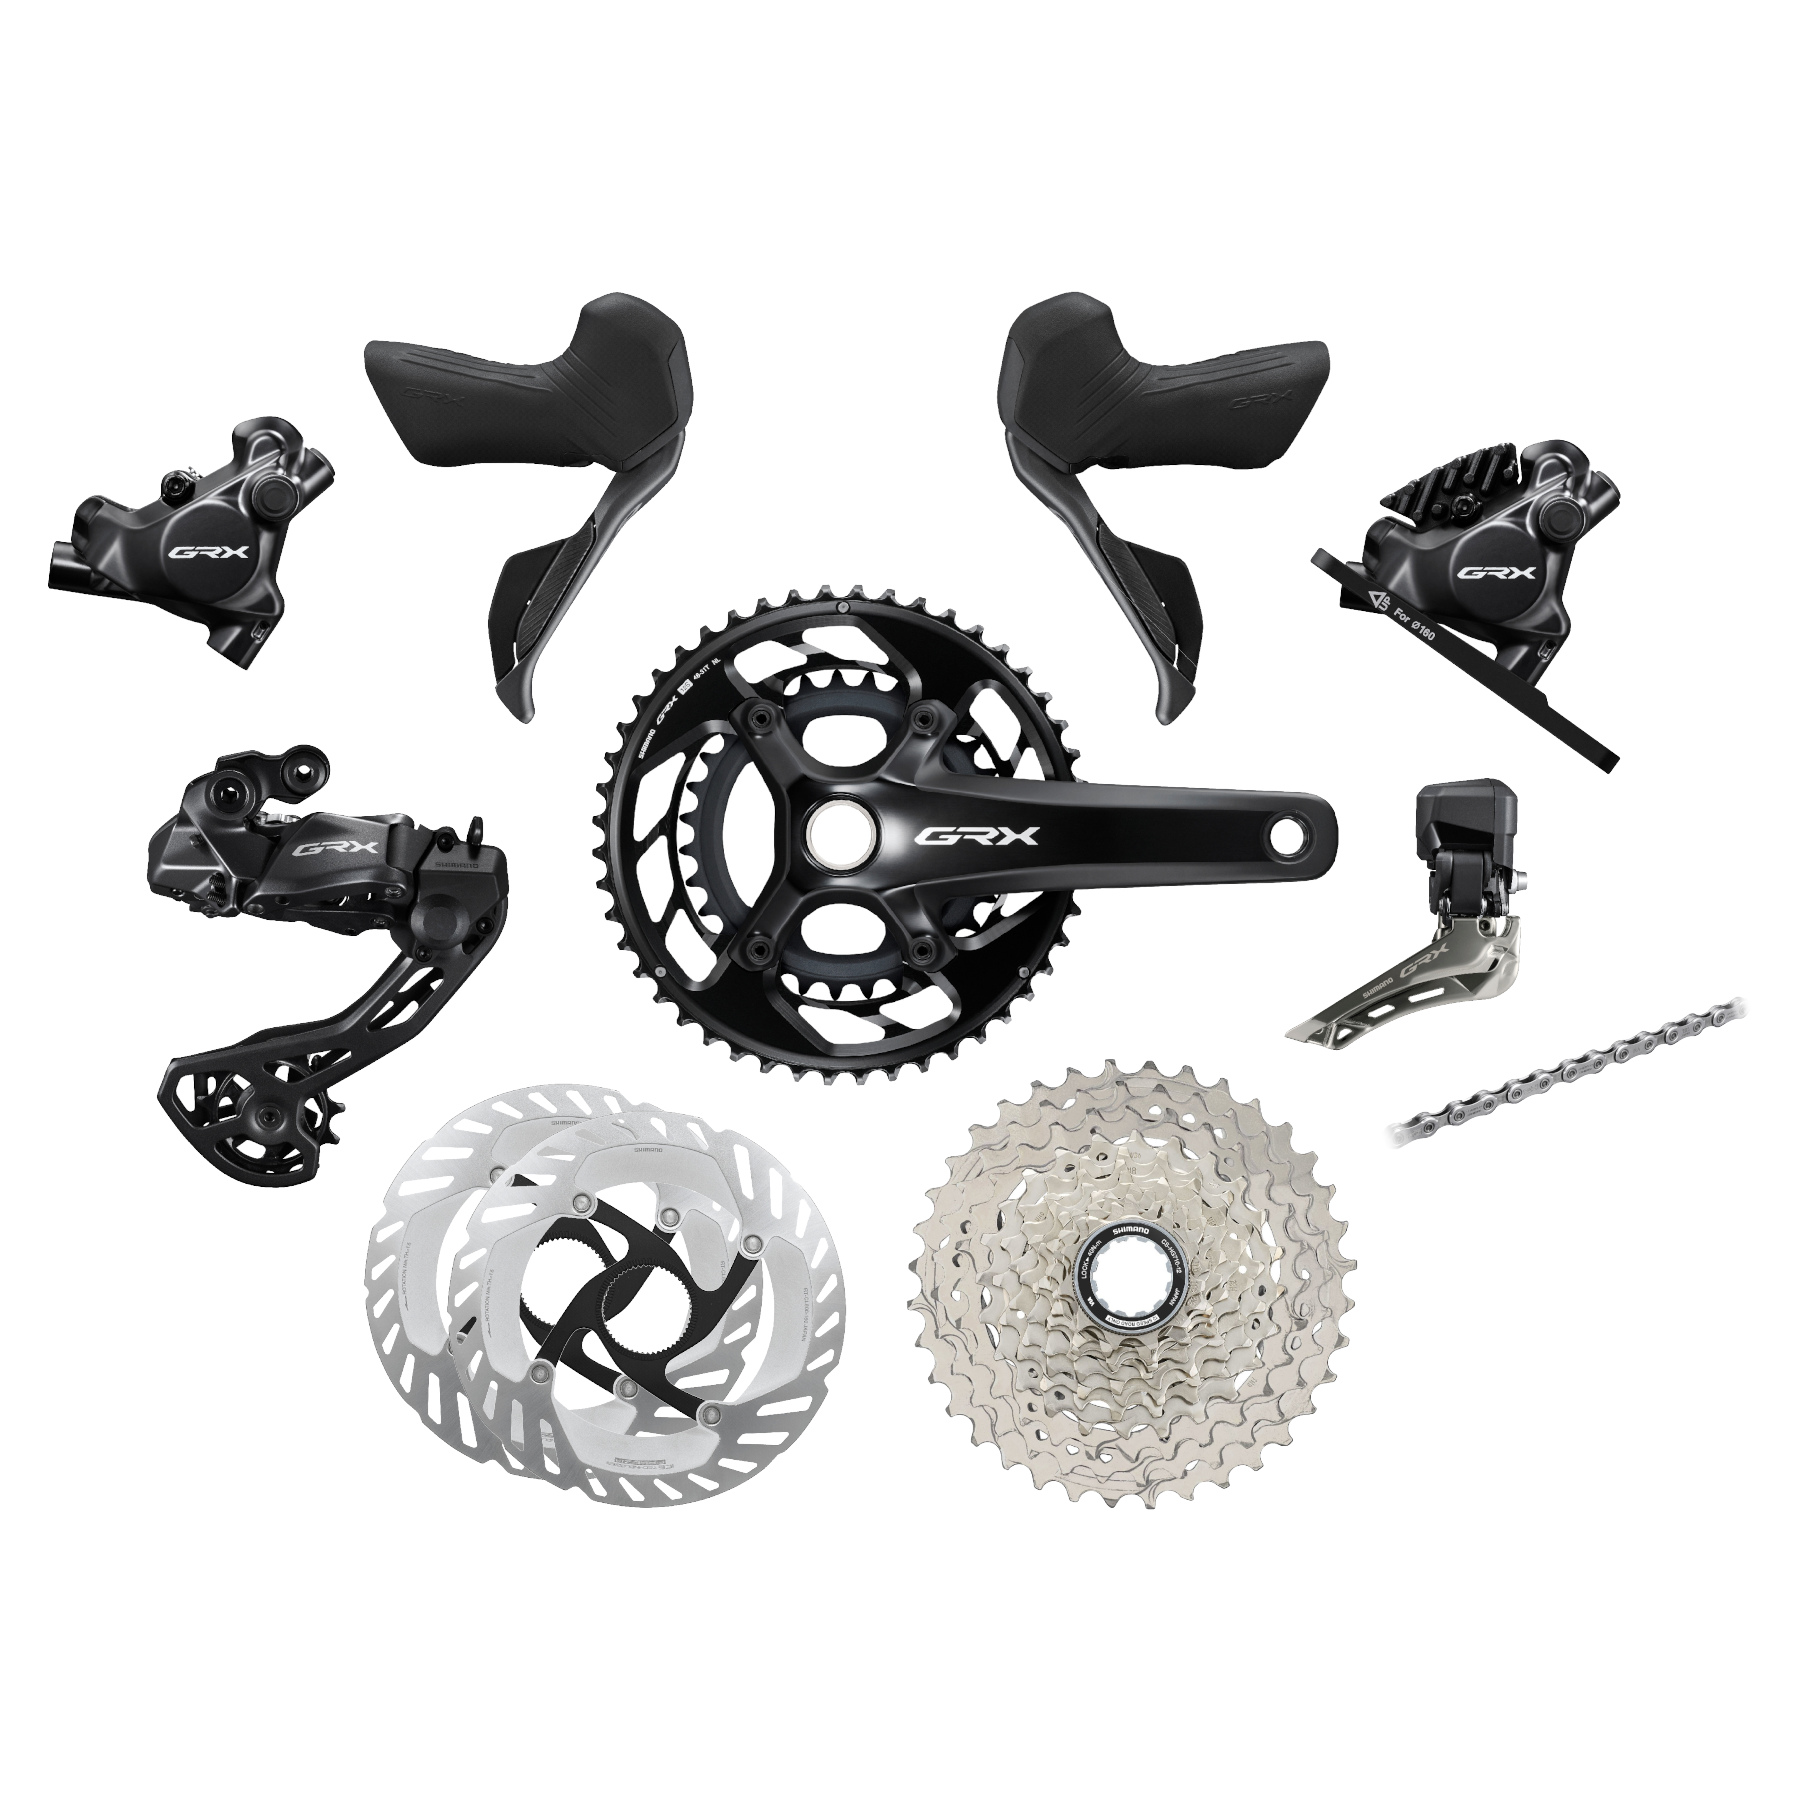 Picture of Shimano GRX RX825 Groupset - Di2 | 2x12-speed | with CS-HG710 Cassette (11-36T)